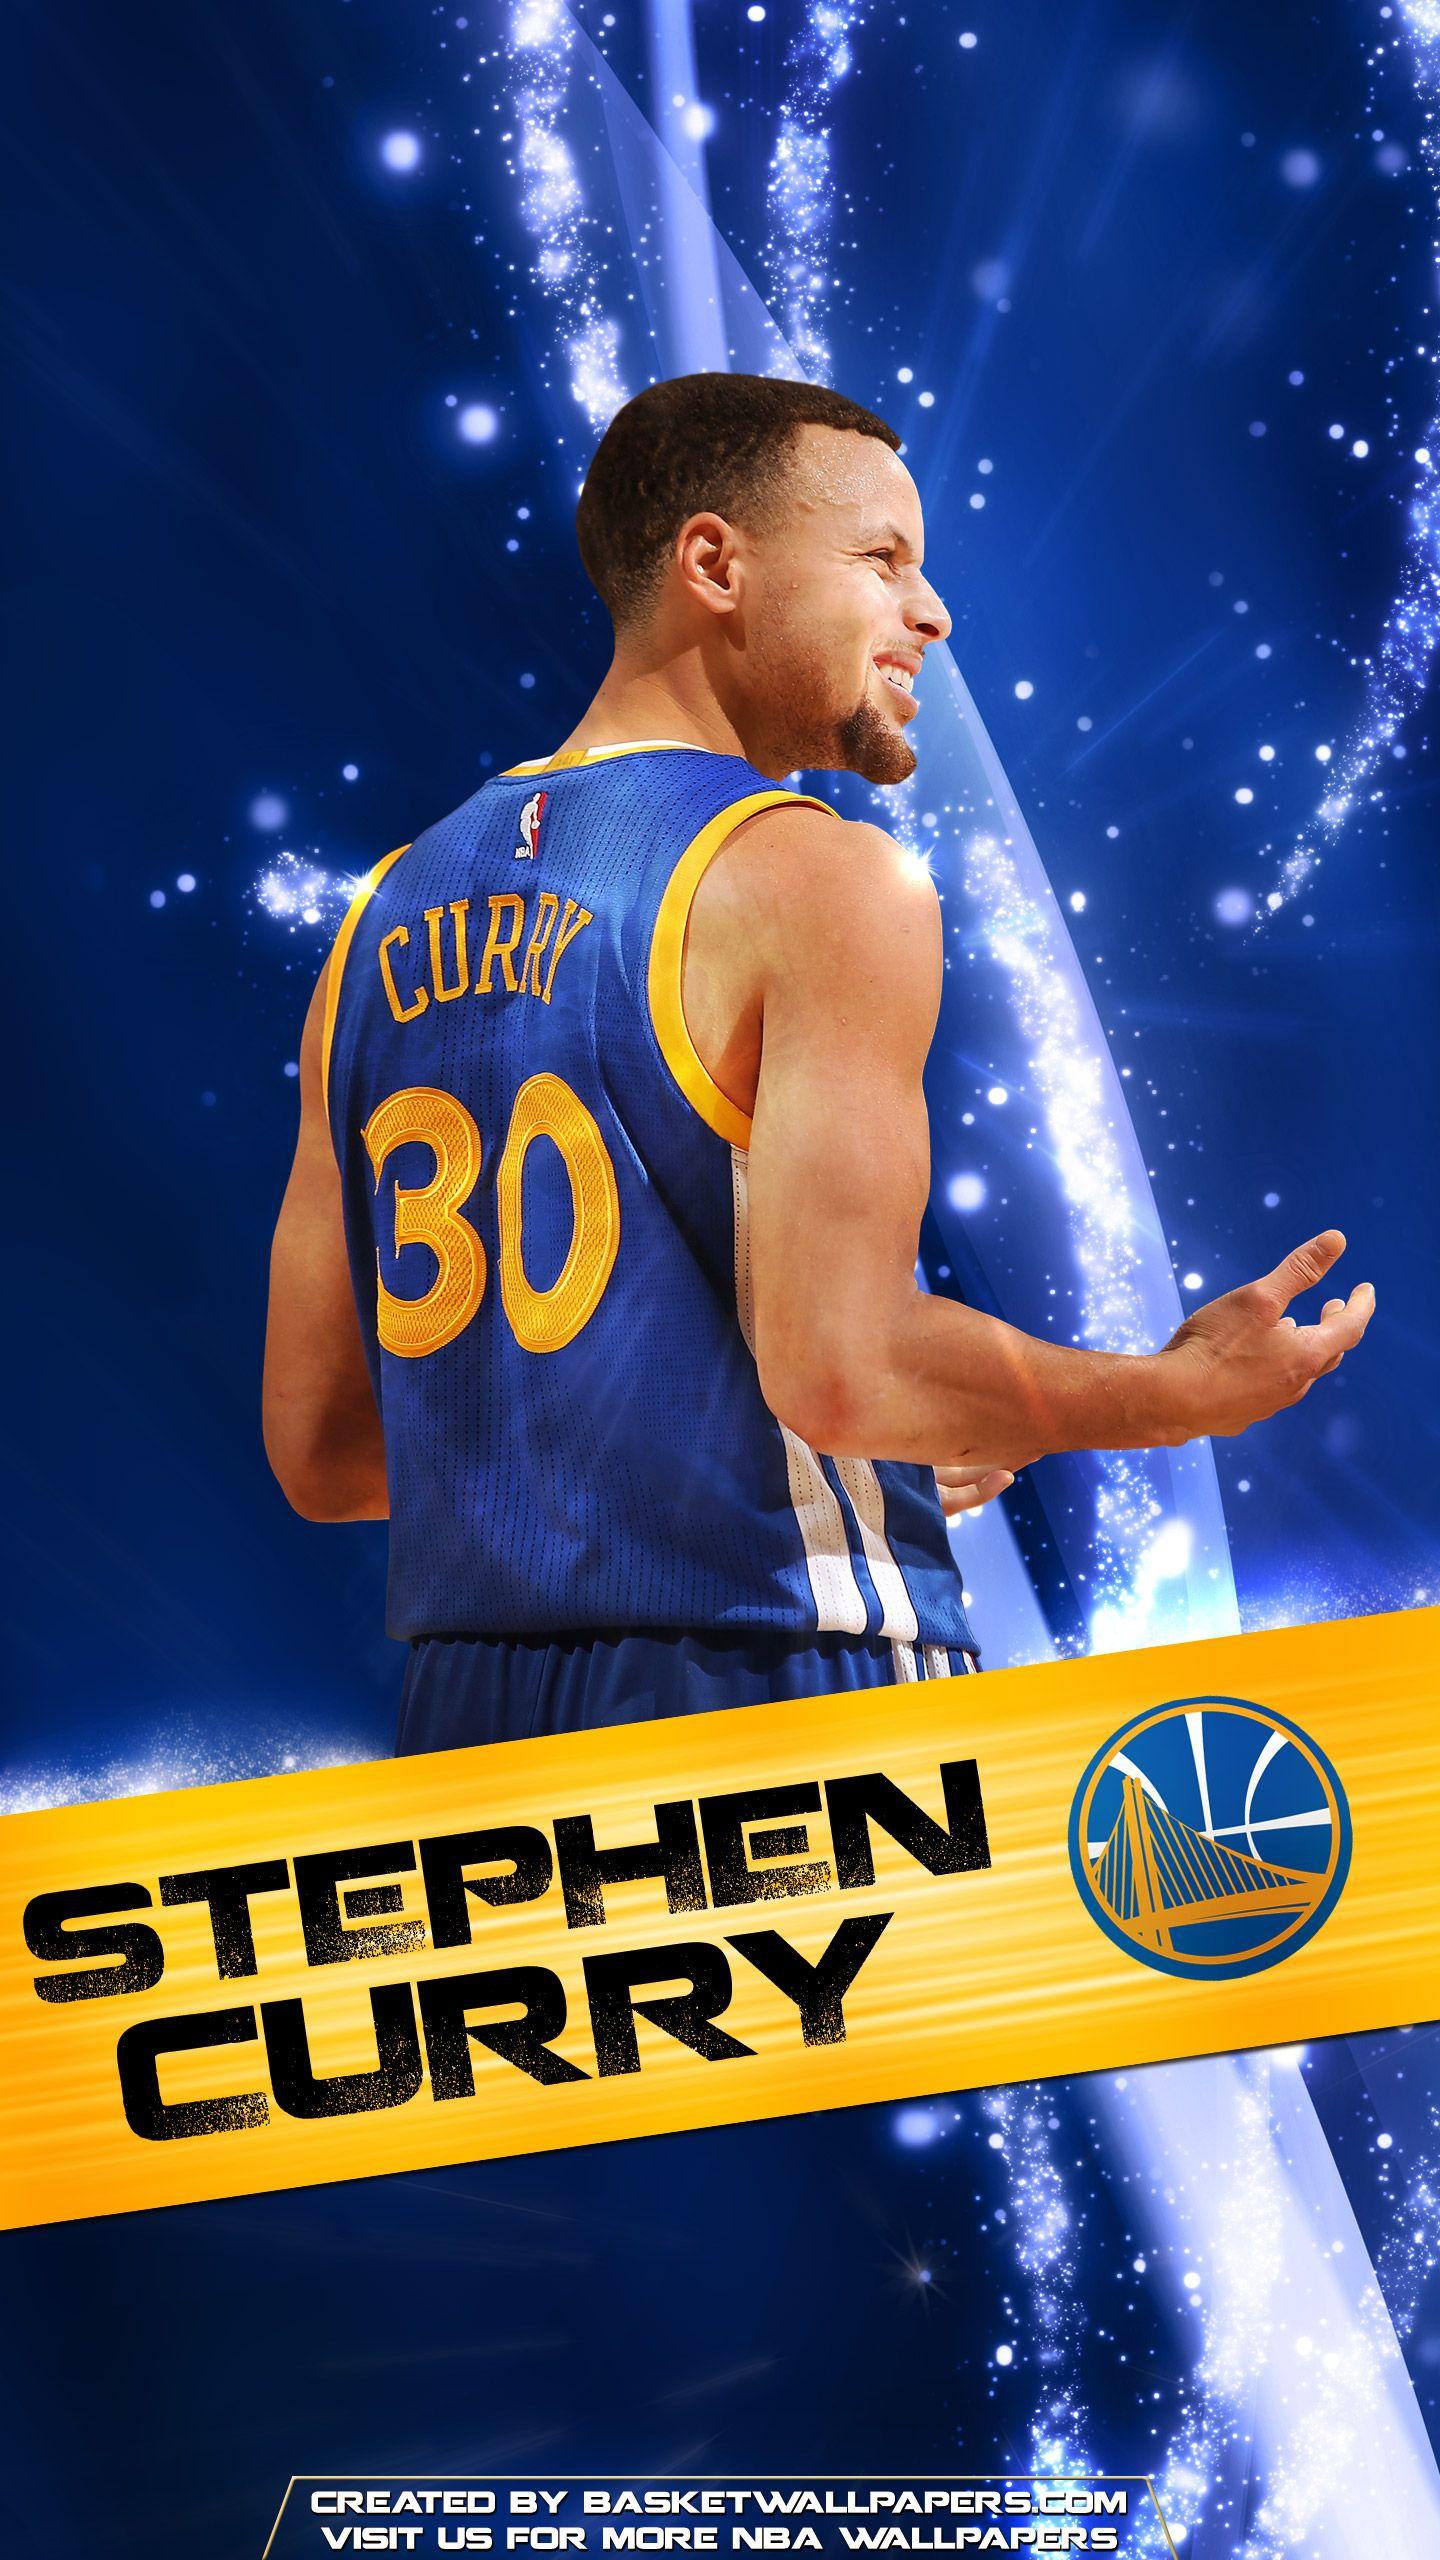 Stephen Curry Wallpaper for iPhone Wallpaper HD. Stephen